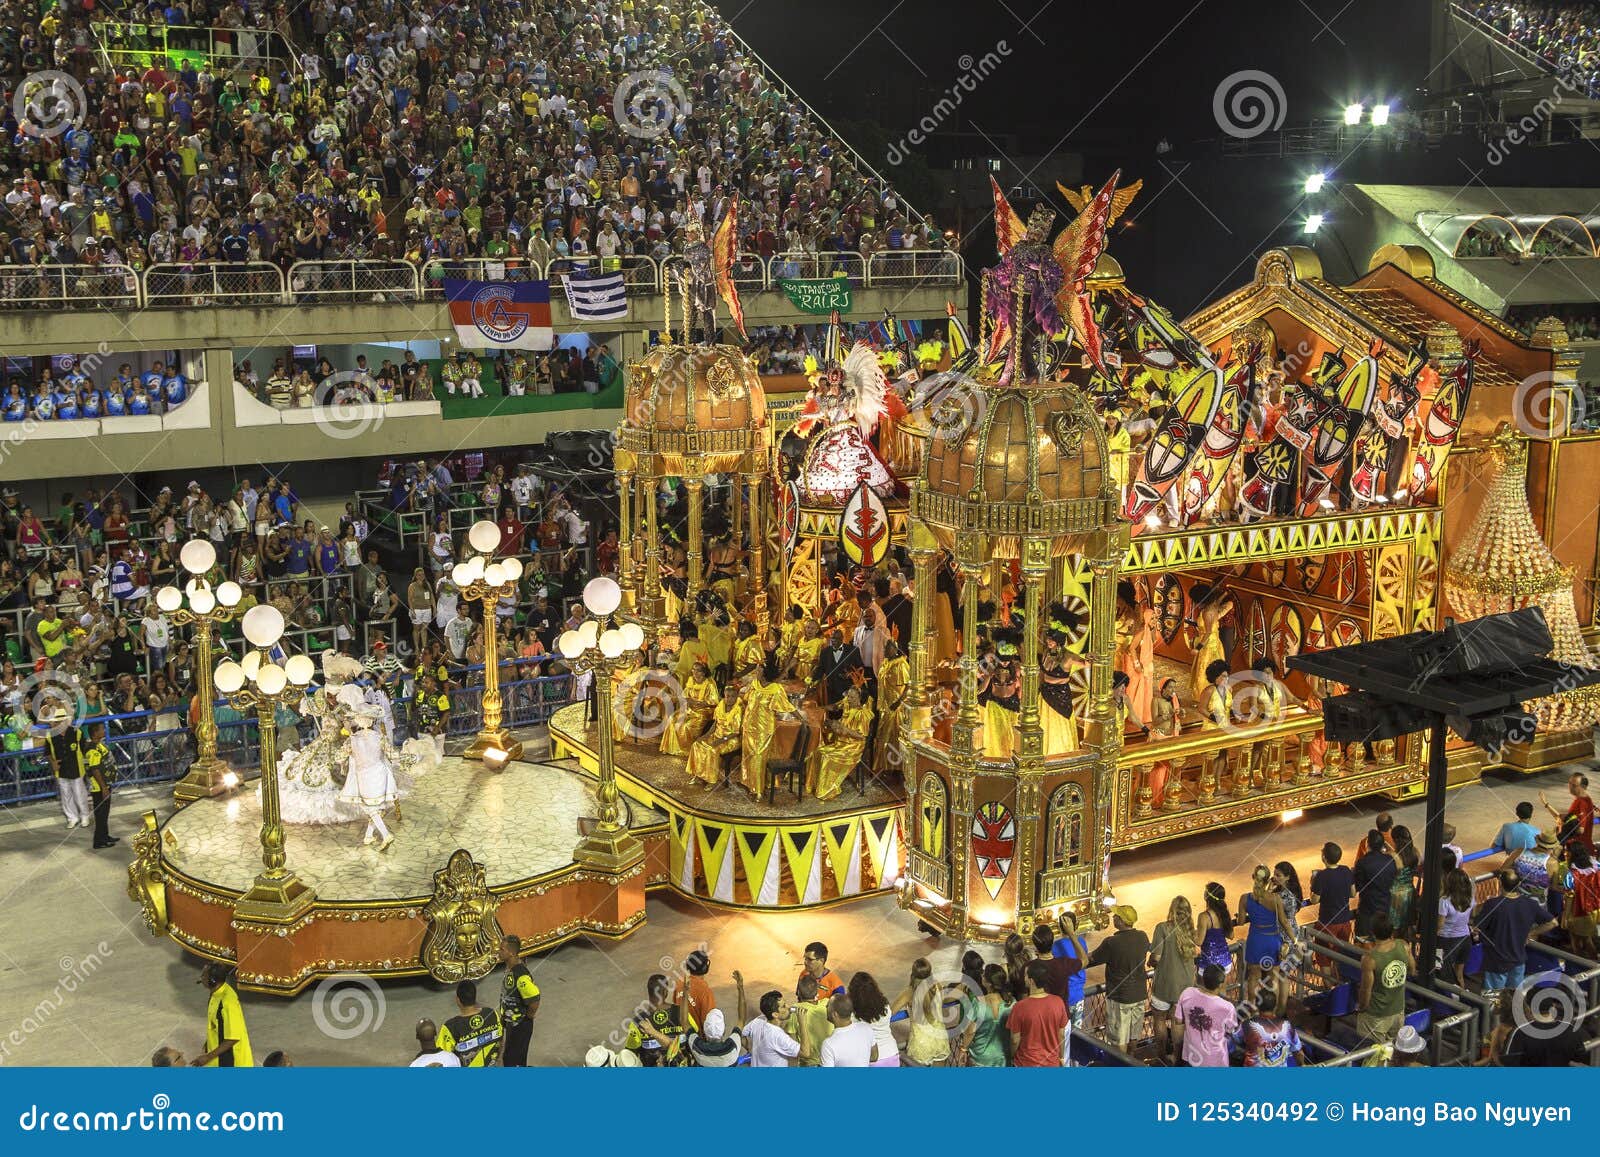 The Brazilian Carnival, or Carnaval is an annual festival in